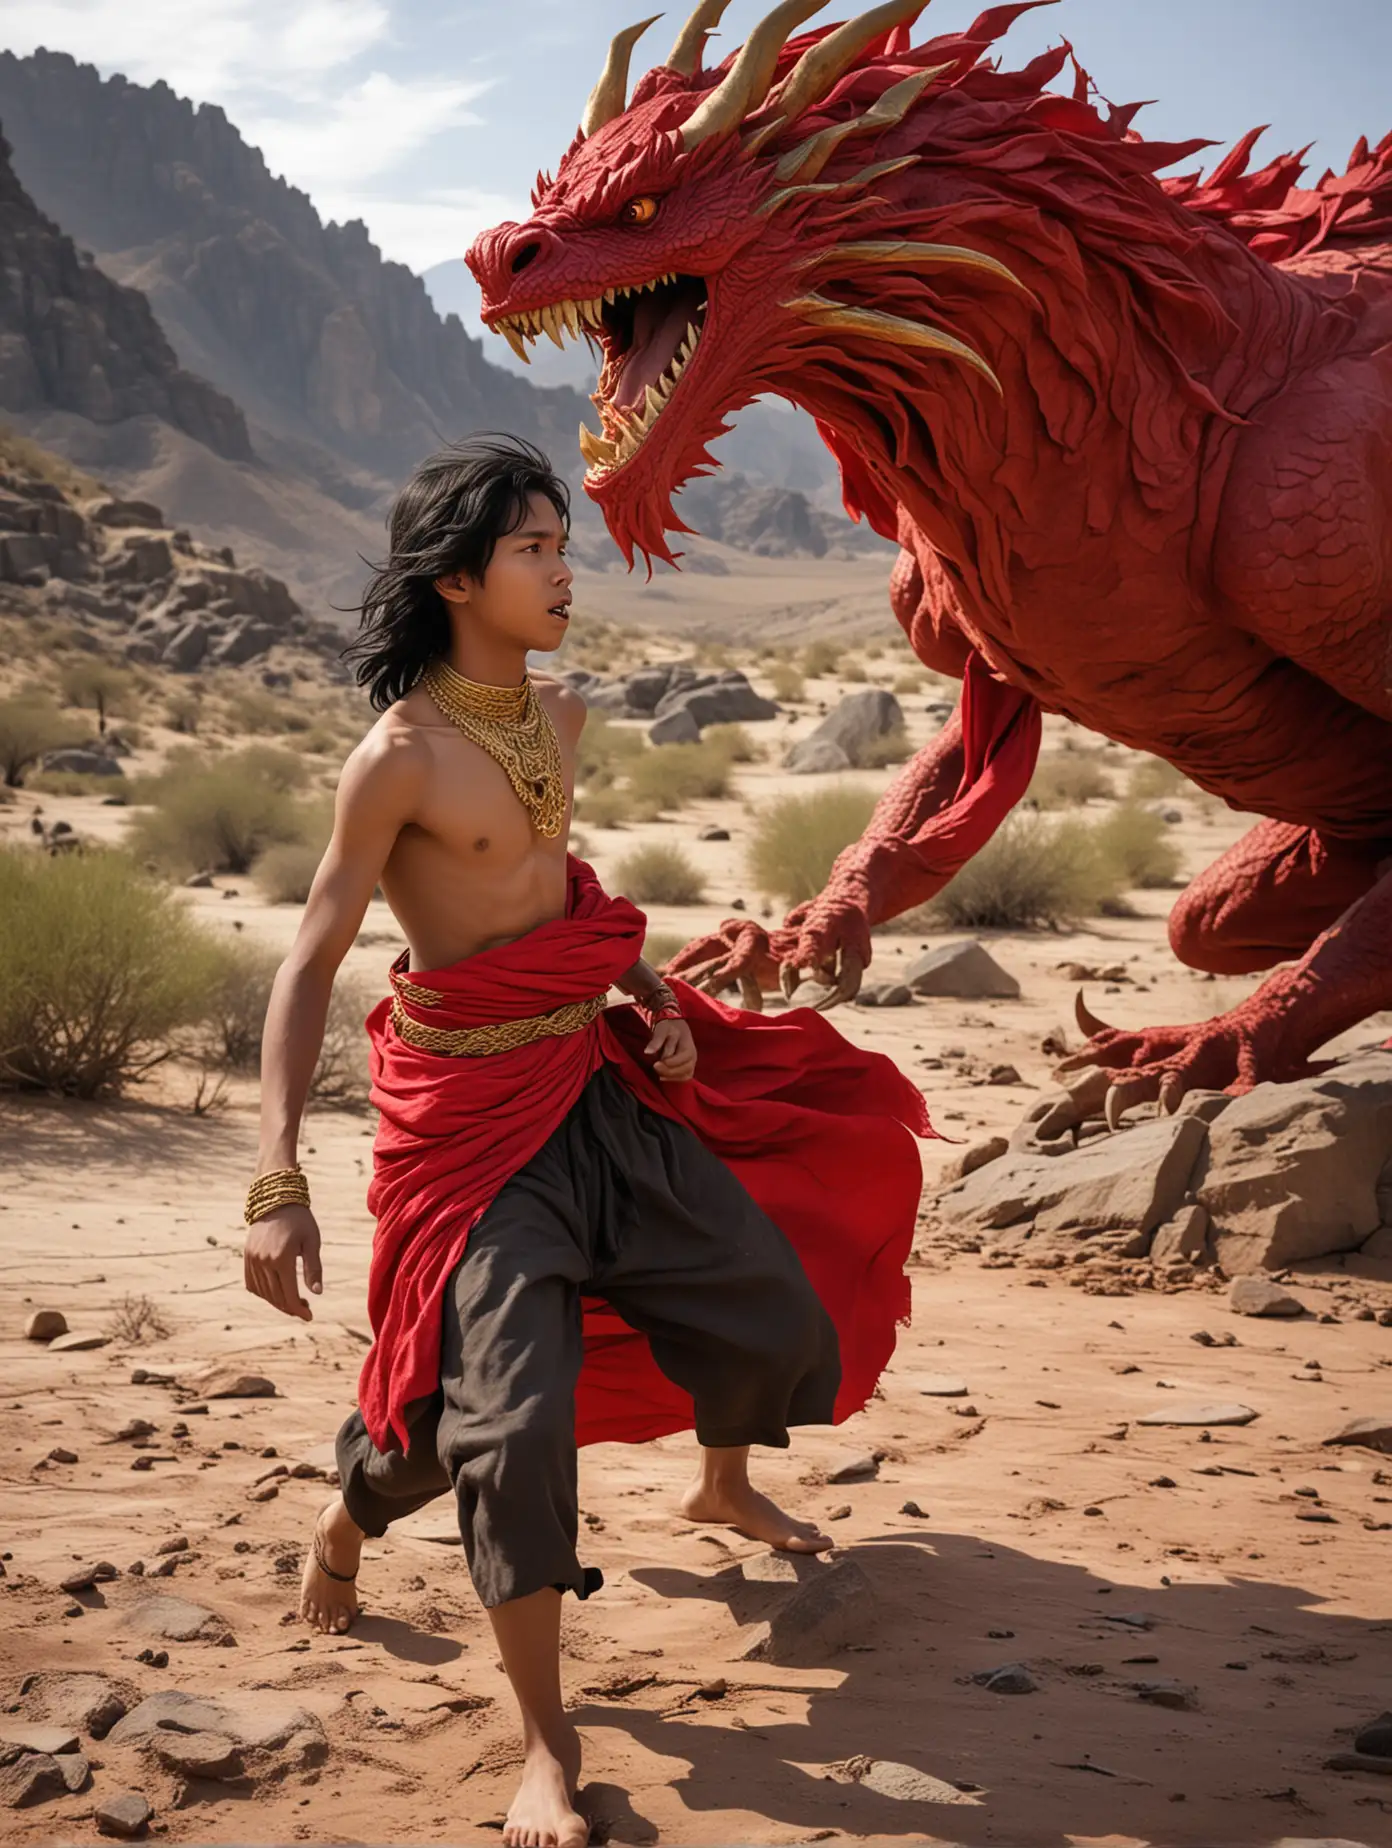 a 15 year old Indonesian boy with a bare chest, long wavy black hair, very black skin color, wearing red cloth and gold jewelry fighting with a giant red colored dragon in a desert rock field at the foot of the mountain